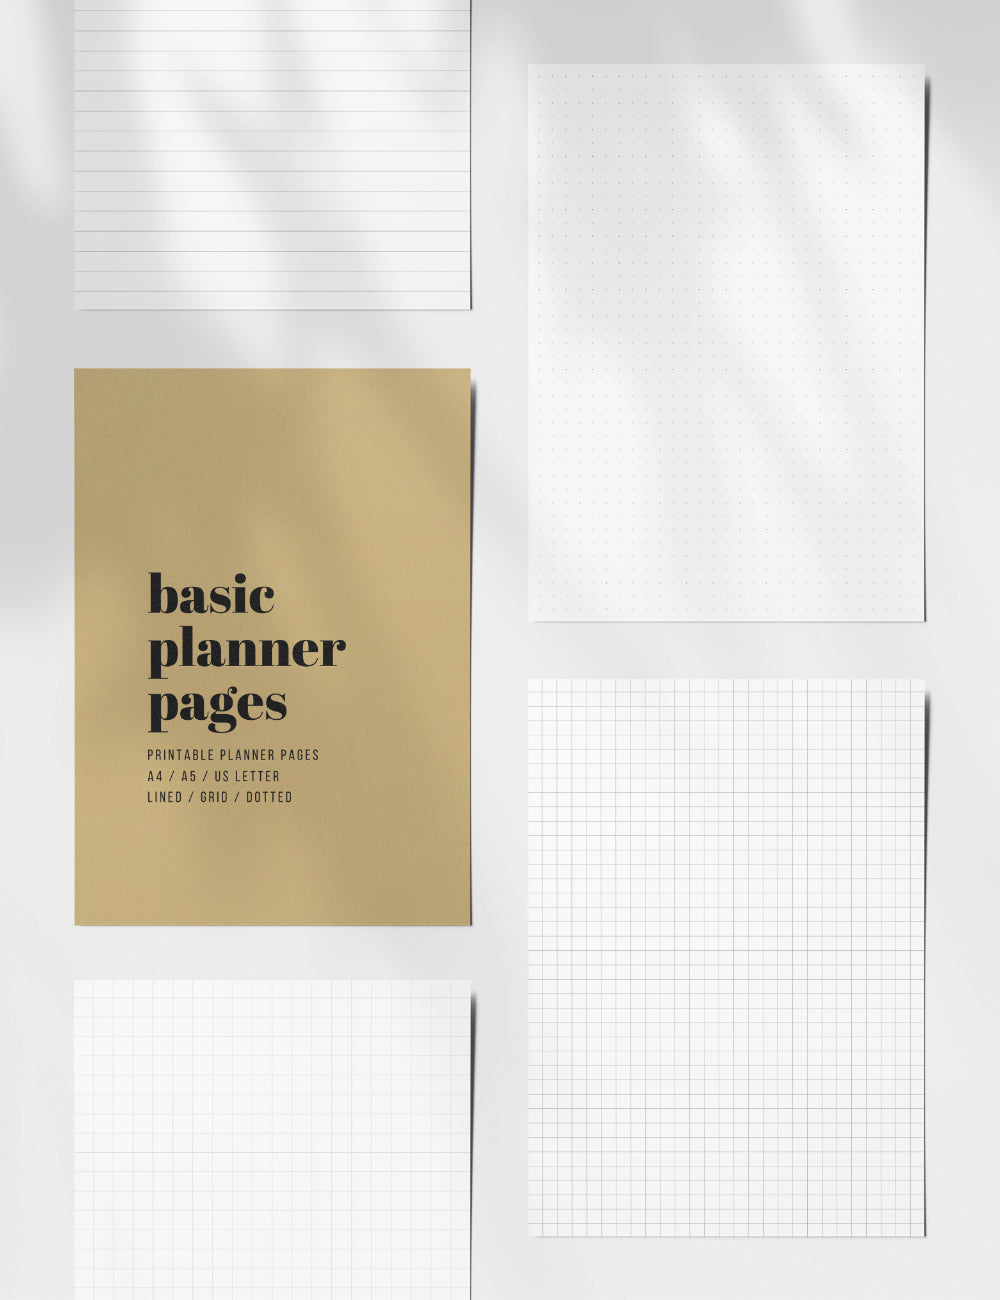 Printable Basic Planner Pages | Lined, Grid. Dotted | Printable Planner Essentials | A4 | A5 | US Letter | Printable Planner Pages | Minimal Aesthetic | Clean Design | PDF + JPEG | PAPER MOON Art & Design